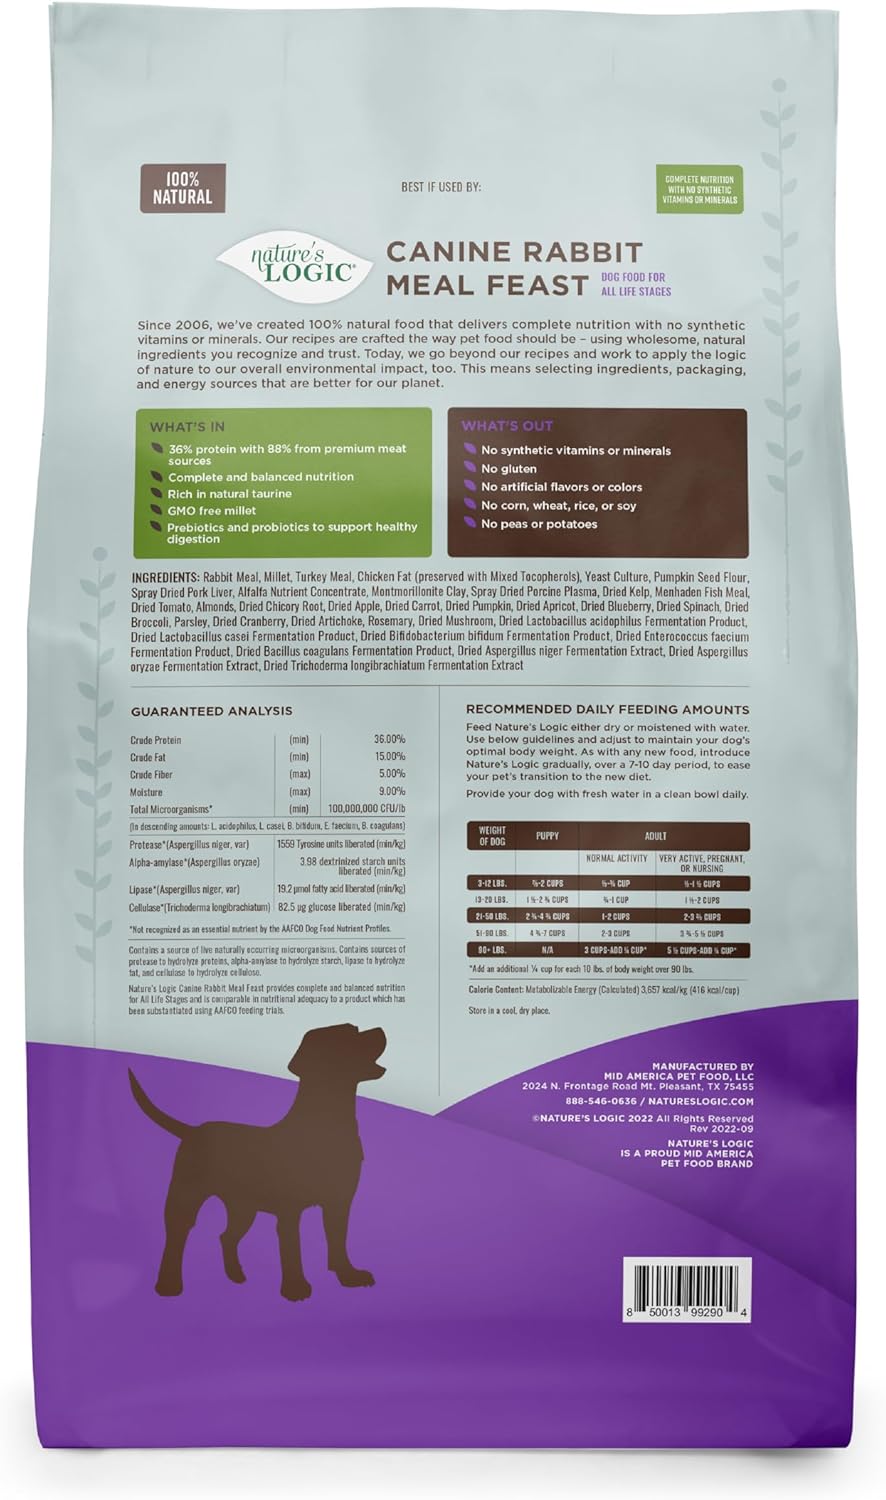 Nature’s Logic Canine Rabbit Meal Feast Dry Dog Food – Gallery Image 3